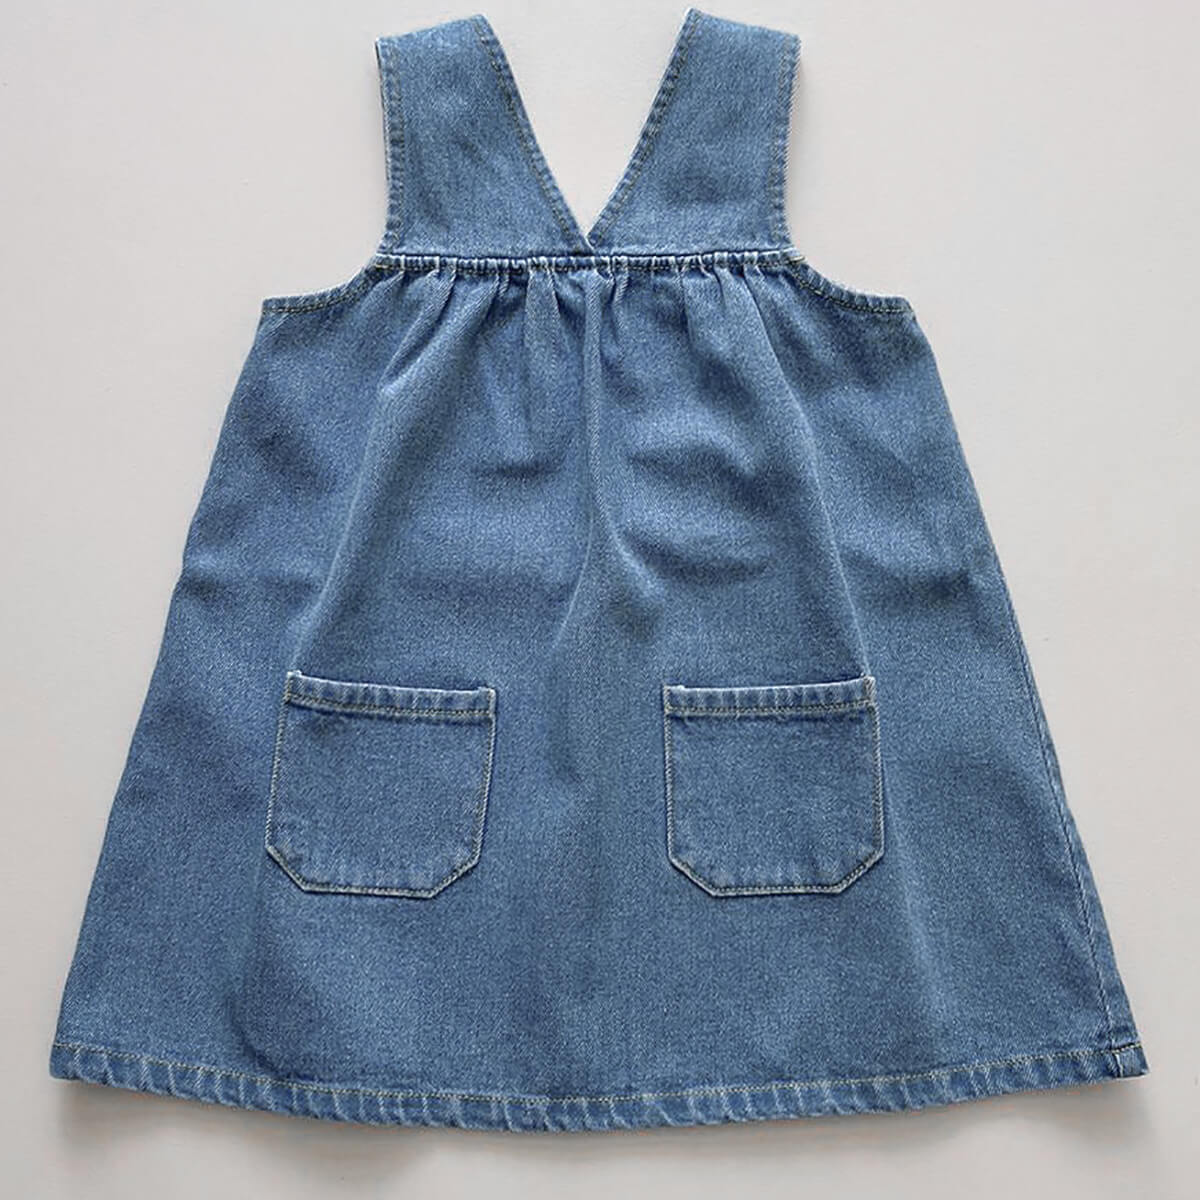 The Denim Overdress by The Simple Folk – Junior Edition